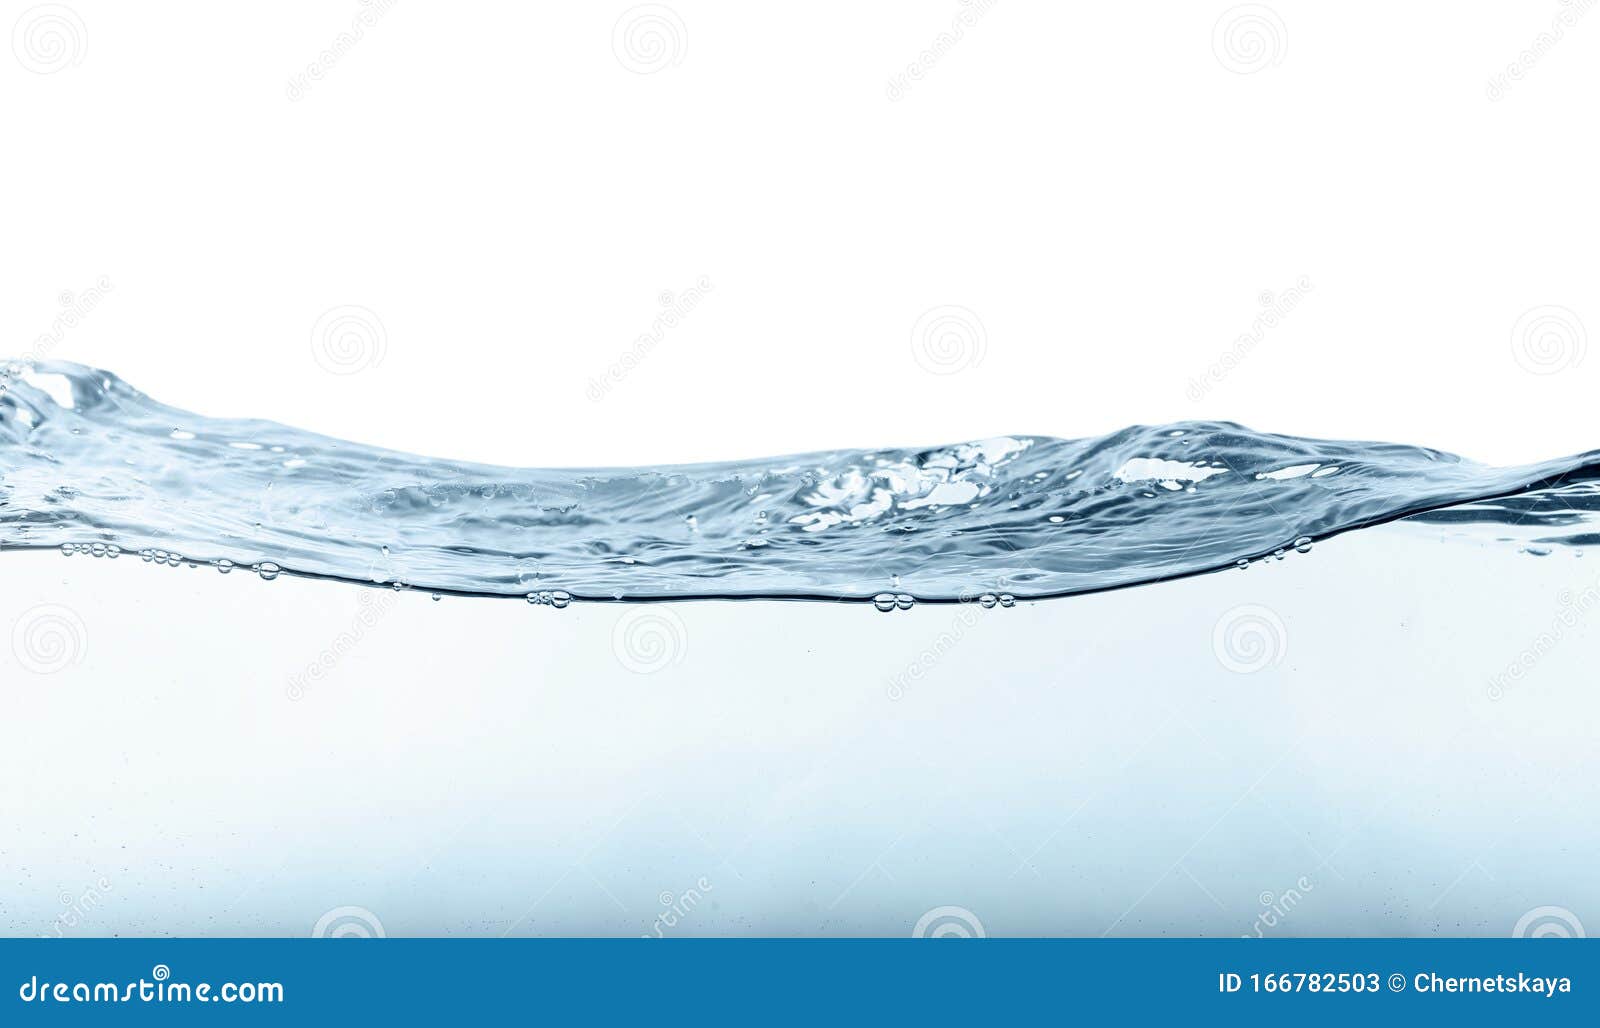 Glass Water Waves Moving Beautiful Cup Closeup Transparent Liquid Splashing  Stock Photo by ©stockbusters 608870064